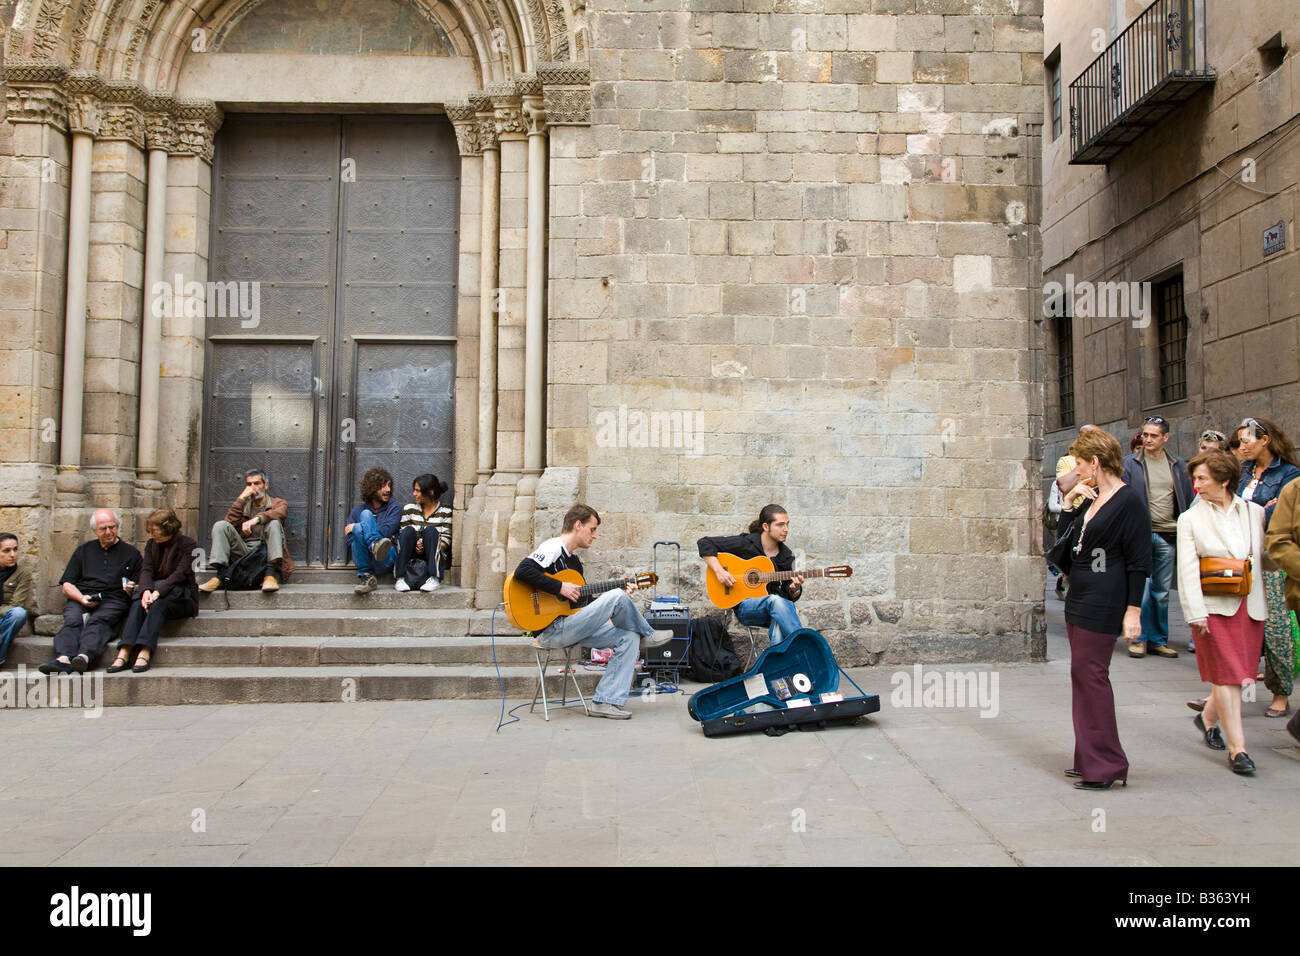 SPAIN Barcelona Two young adult men play acoustic guitar in plaza with open guitar case selling CDs of music people listen Stock Photo